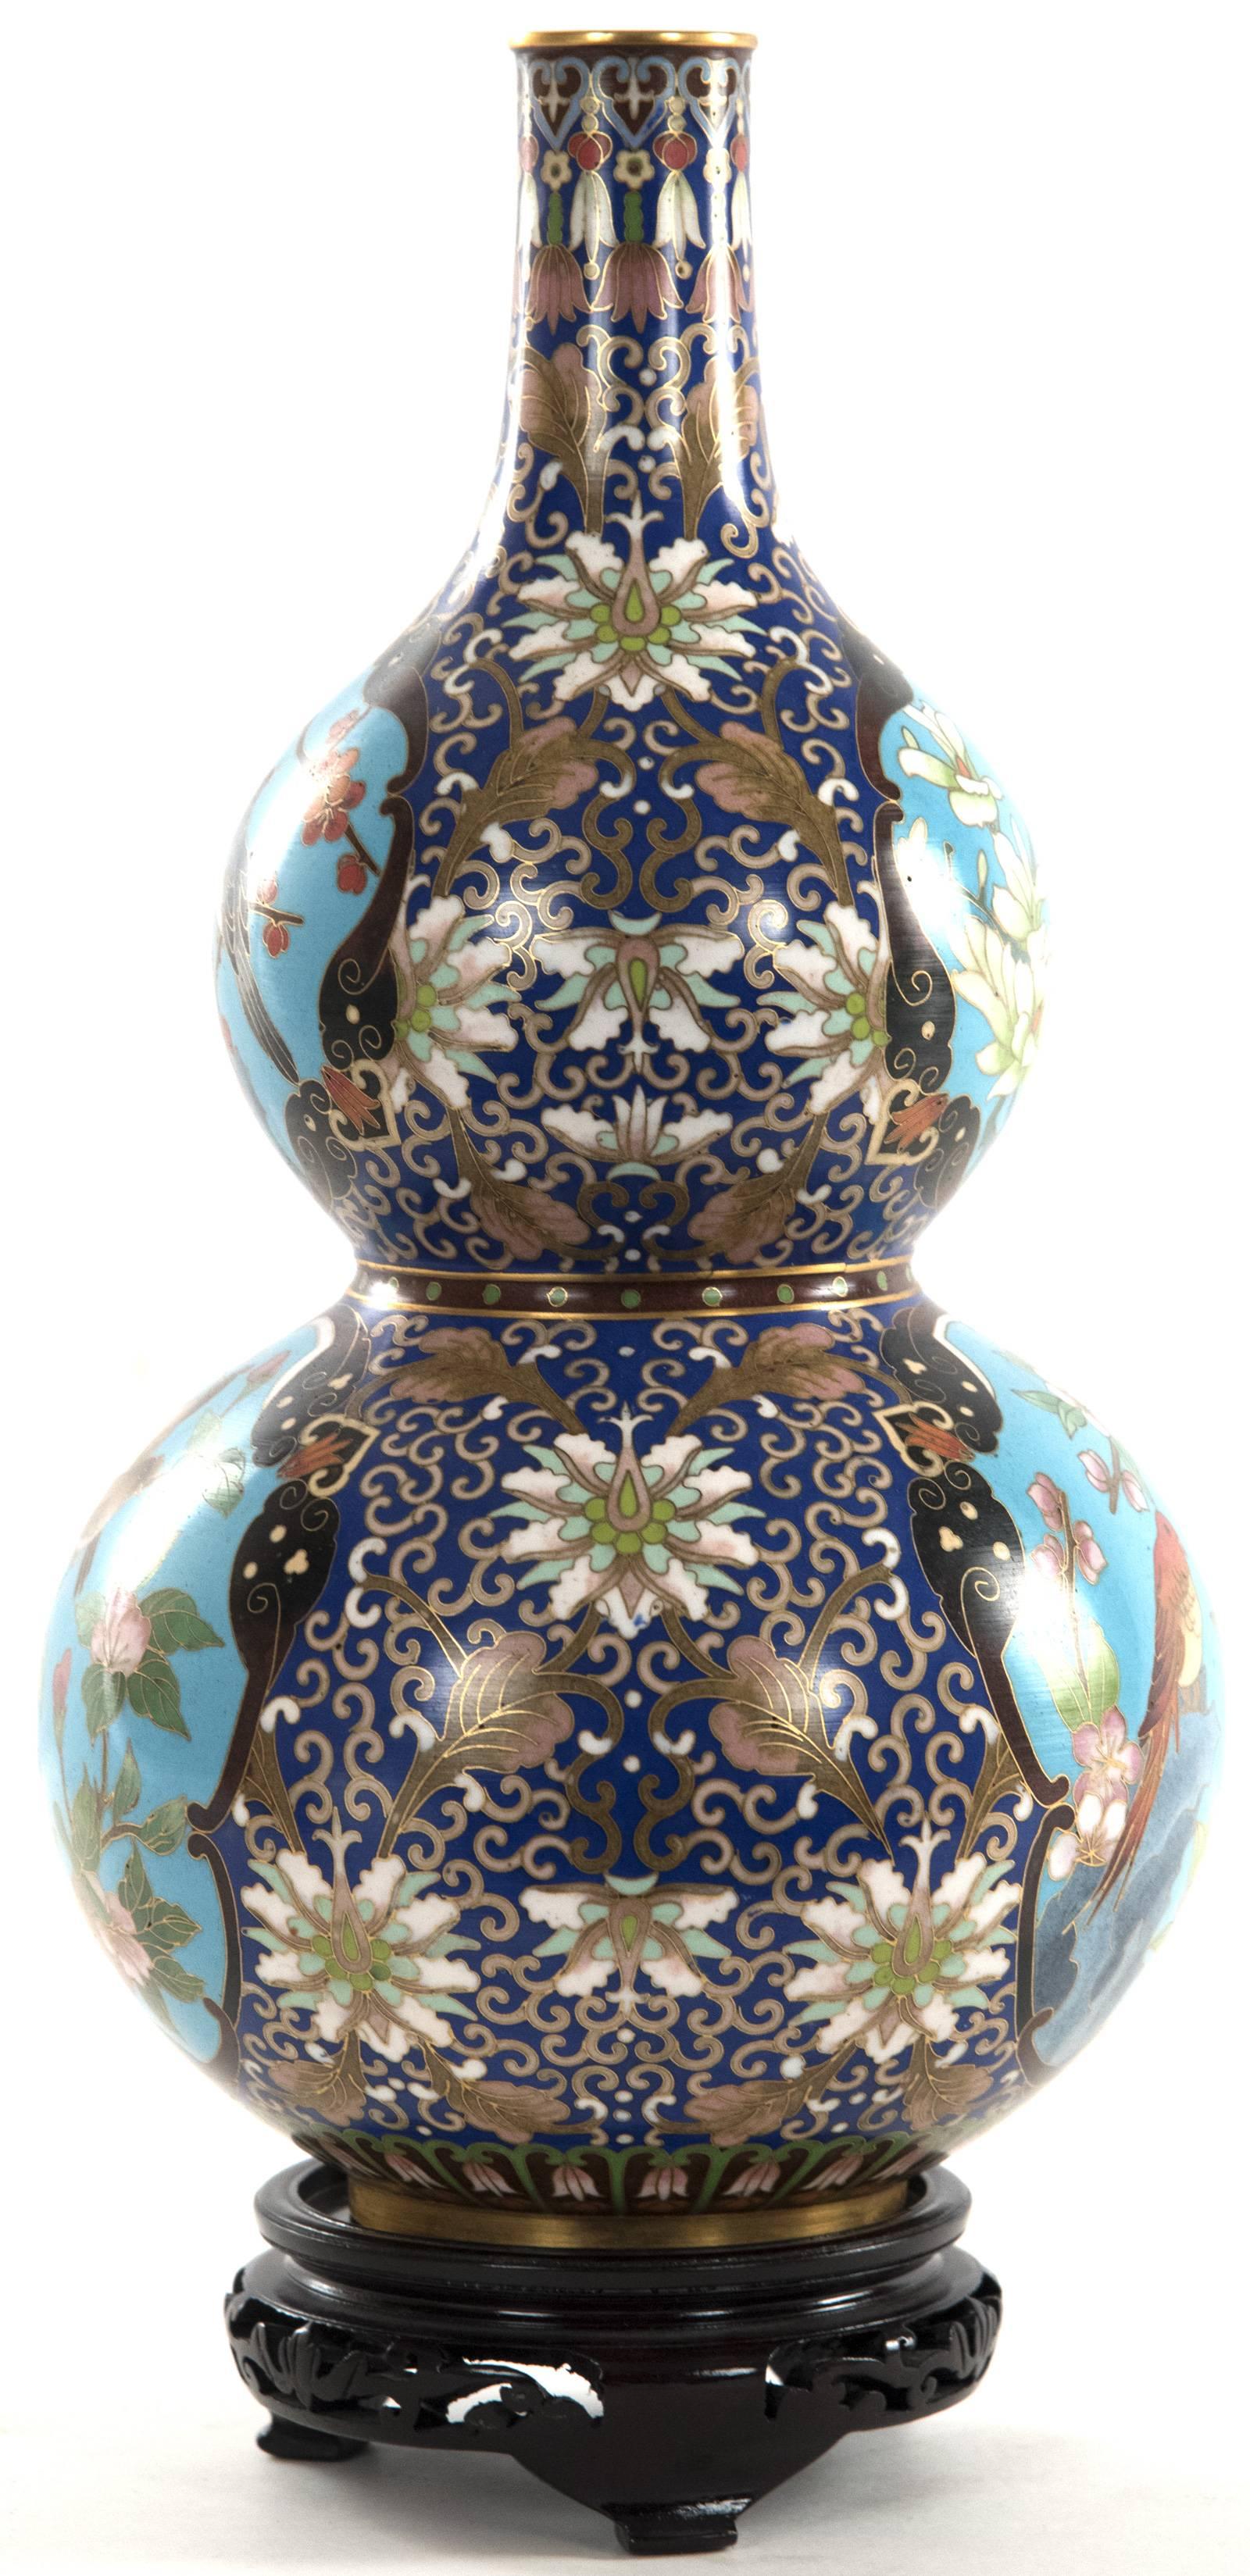 A 20th century Chinese cloisonné enamel vase of double gourd form supported on a carved and pierced wood stand. The vase is fully decorated with the dark blue ground richly covered with scrolling filigree and florals and cerulean cartouches